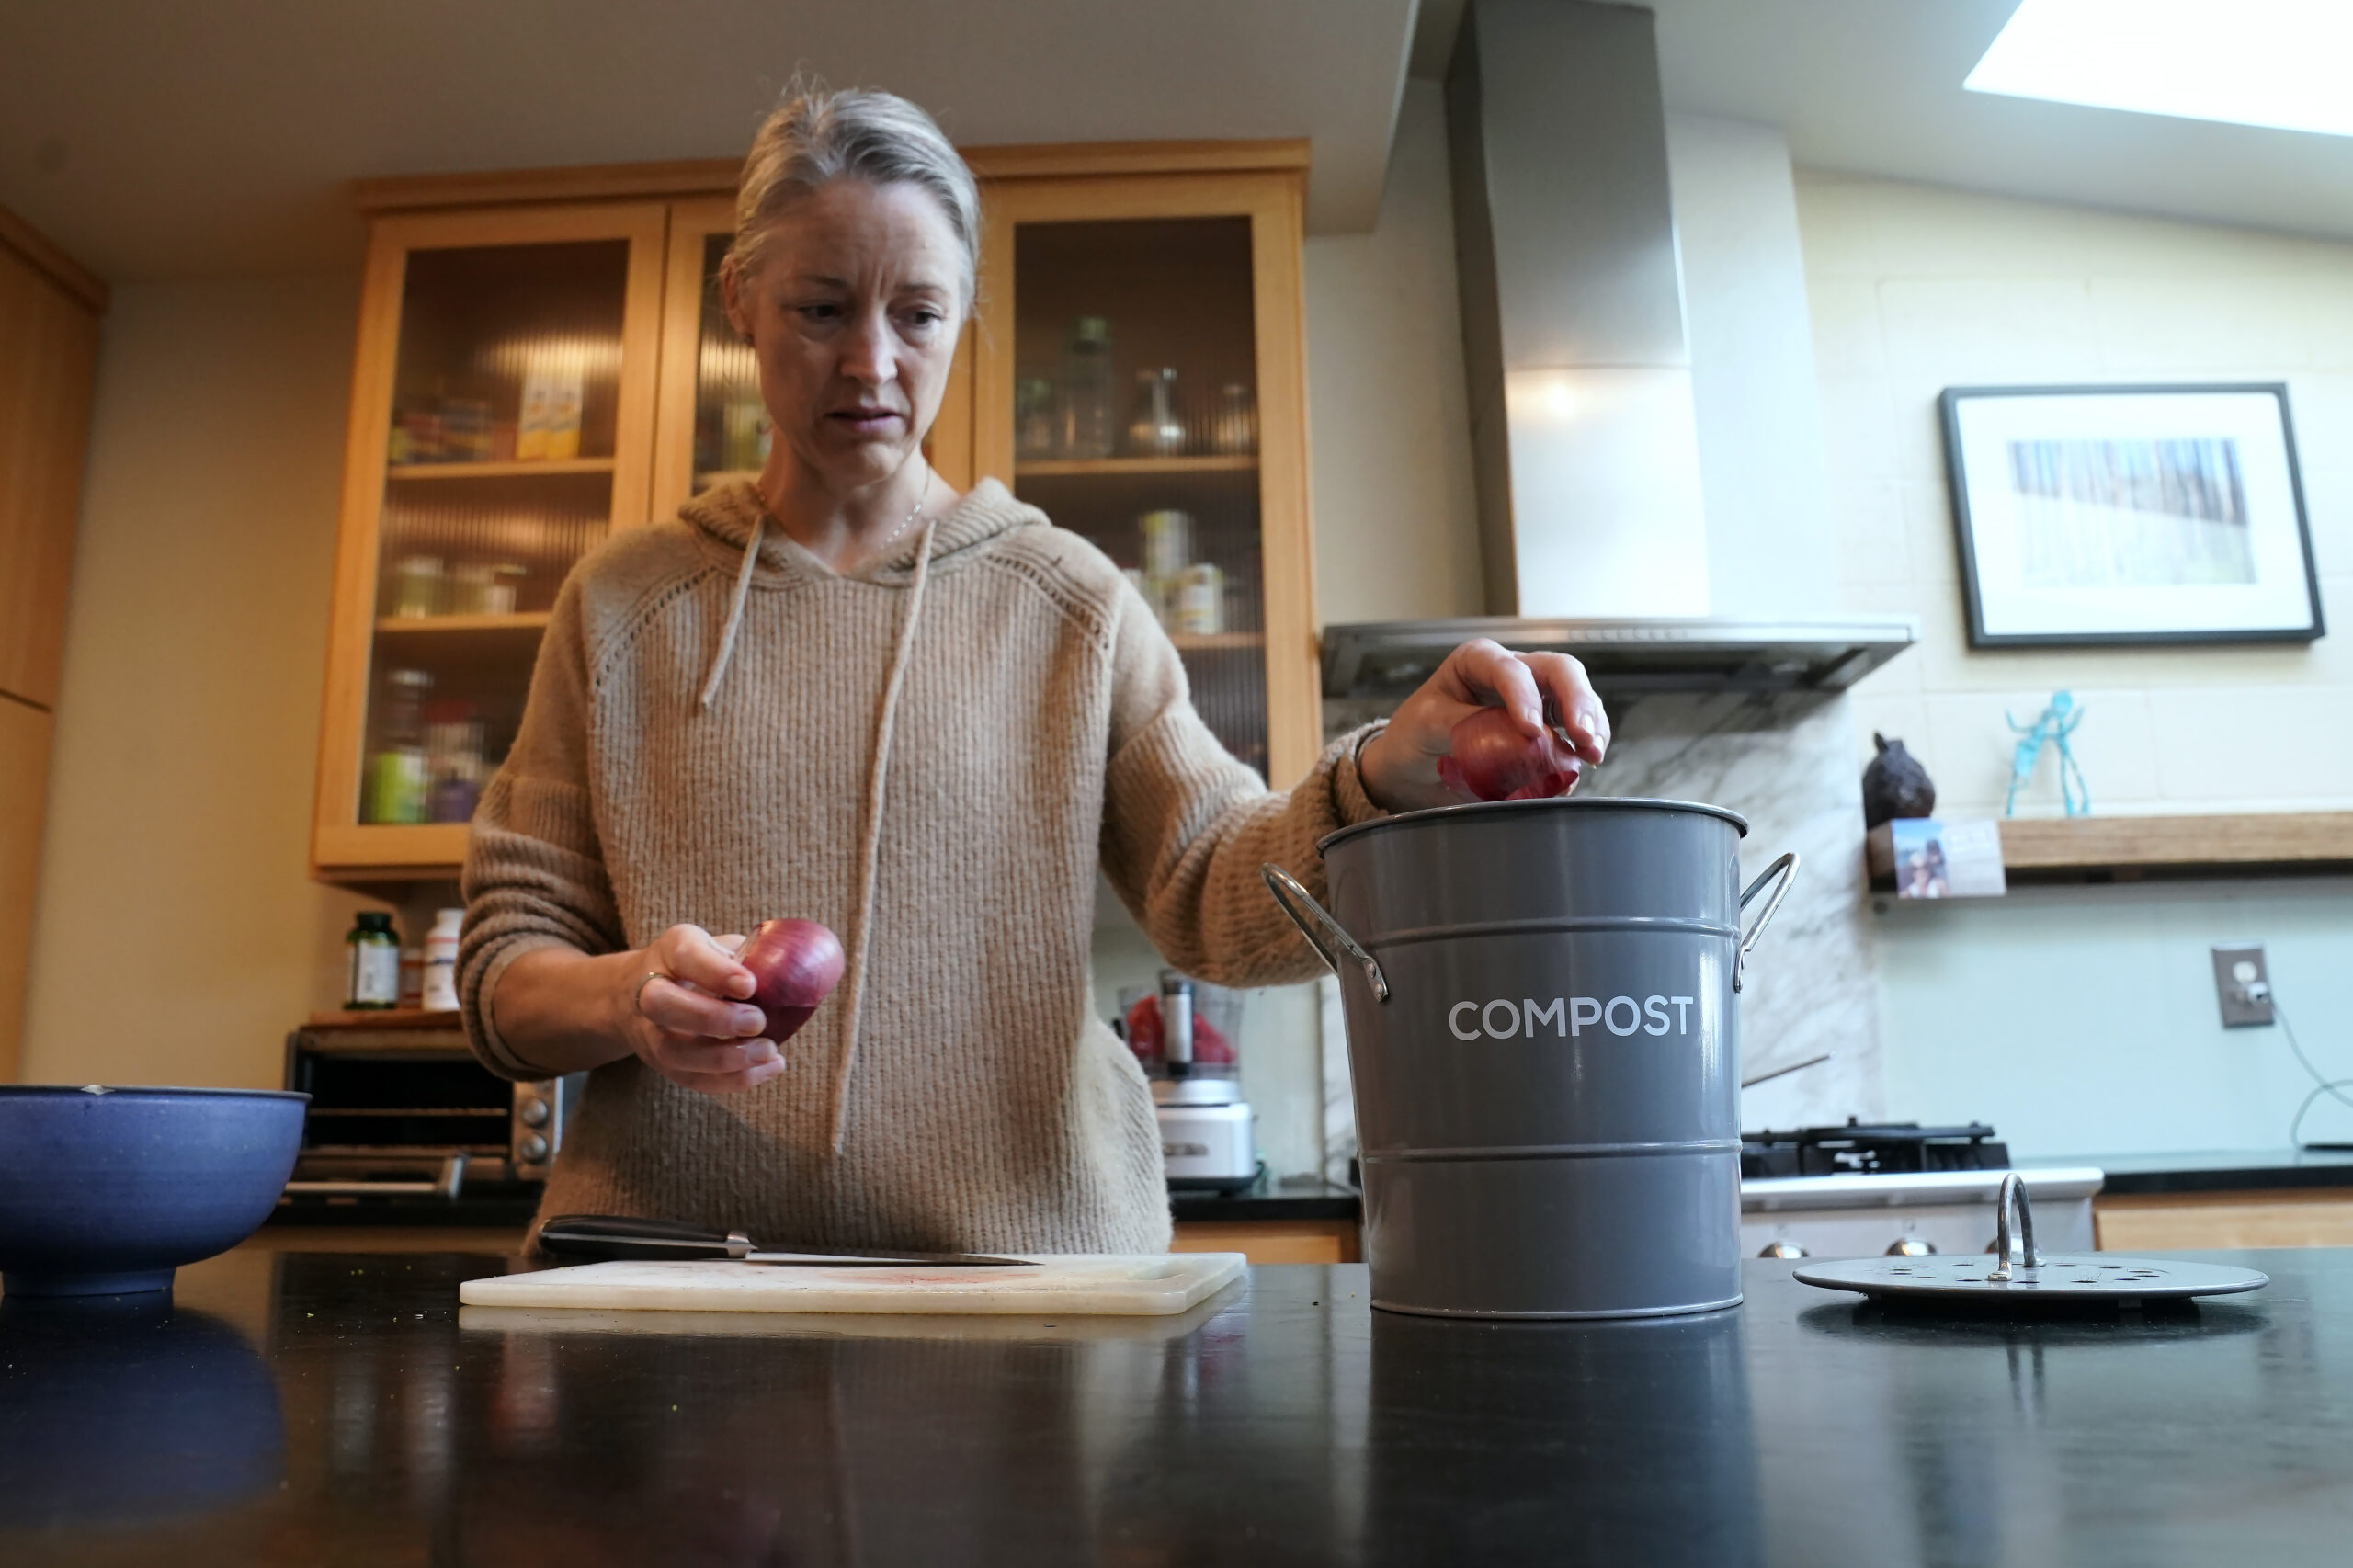 Joy Klineberg tosses an onion peel into container to be used for composting while preparing a family meal at her home in Davis, Calif., Tuesday, Nov. 30, 2021. In January 2022, new rules take effect in California requiring people to recycle their food waste to be combusted or turned into energy. Davis already requires residents to recycle their food waste into the yard waste bin instead of the trash. (AP Photo/Rich Pedroncelli)